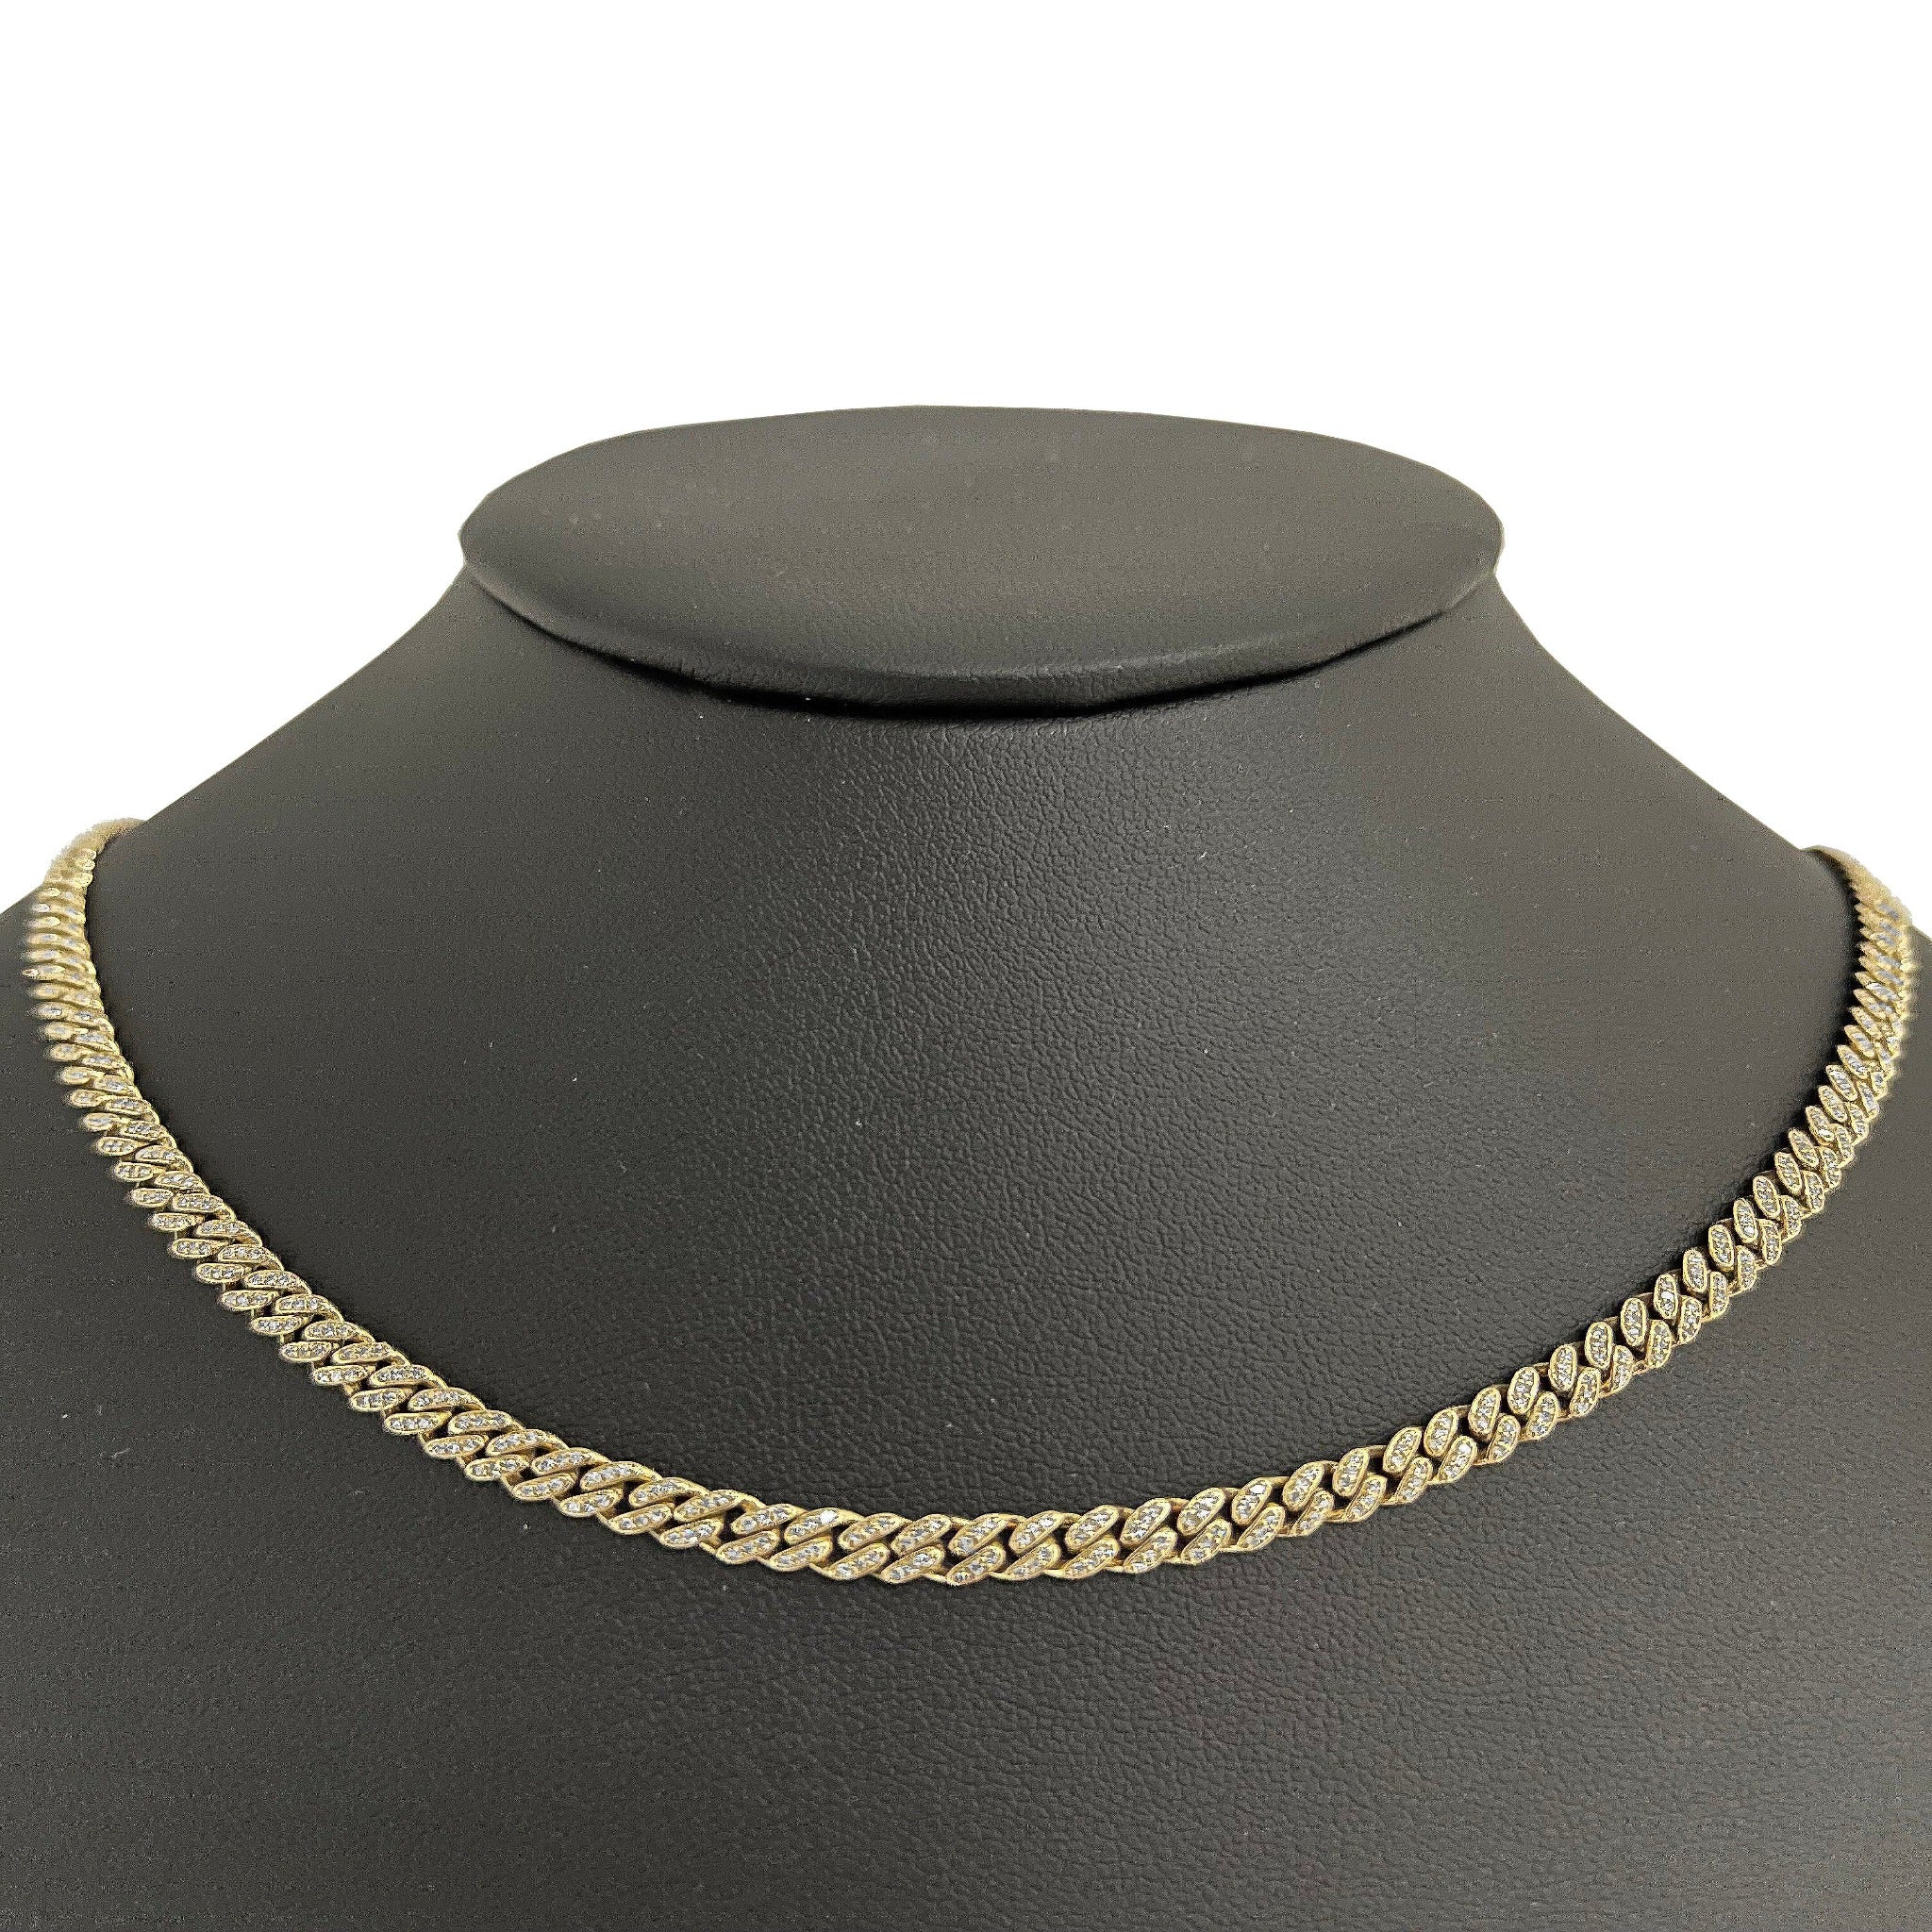 ''SPECIAL! 4mm 1.82ct 14k Yellow GOLD Diamond Round Cuban Necklace 18''''''